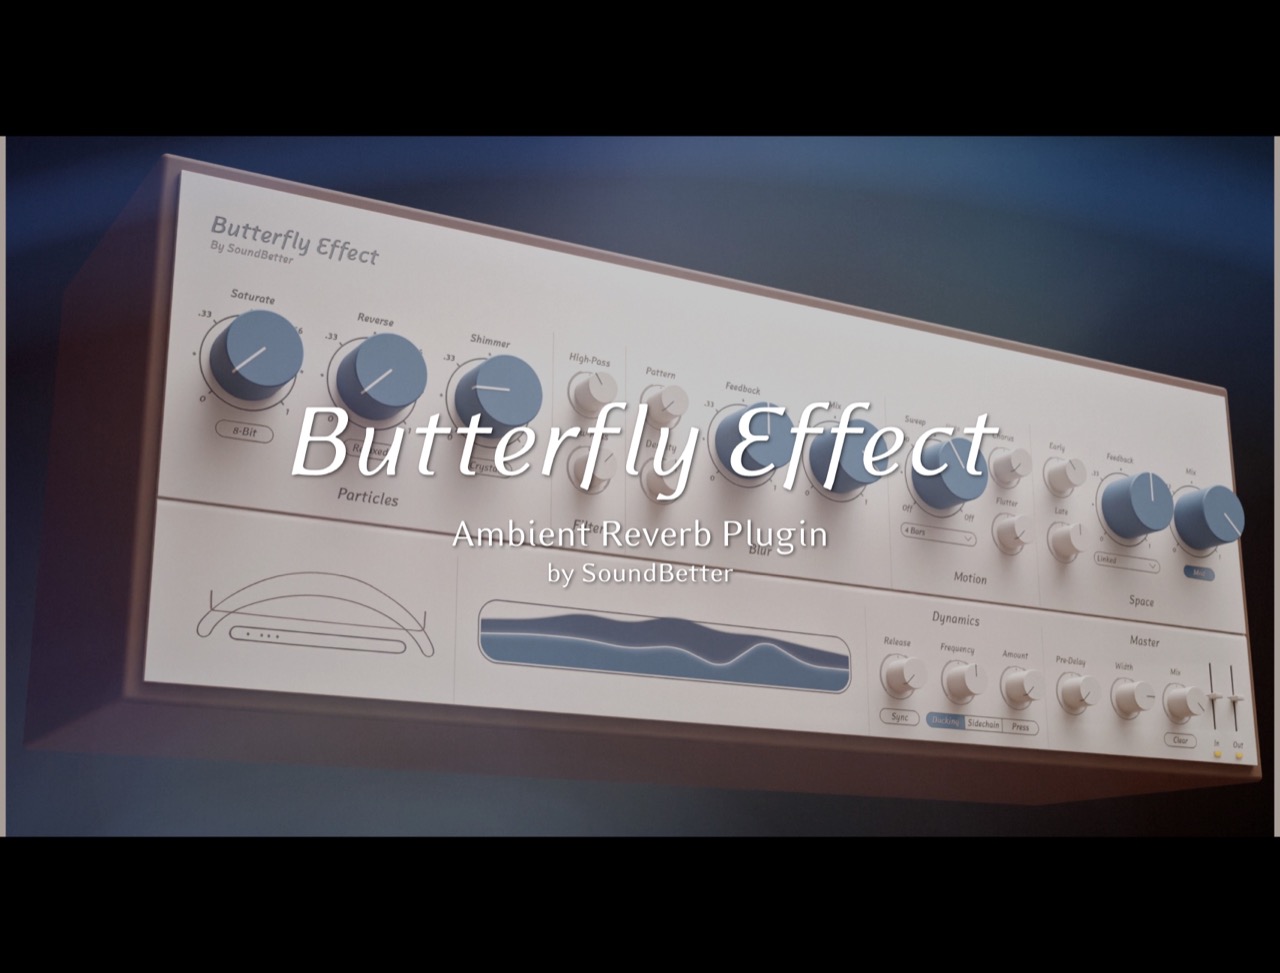 Butterfly Effect - Ambient Reverb Plugin by SoundBetter